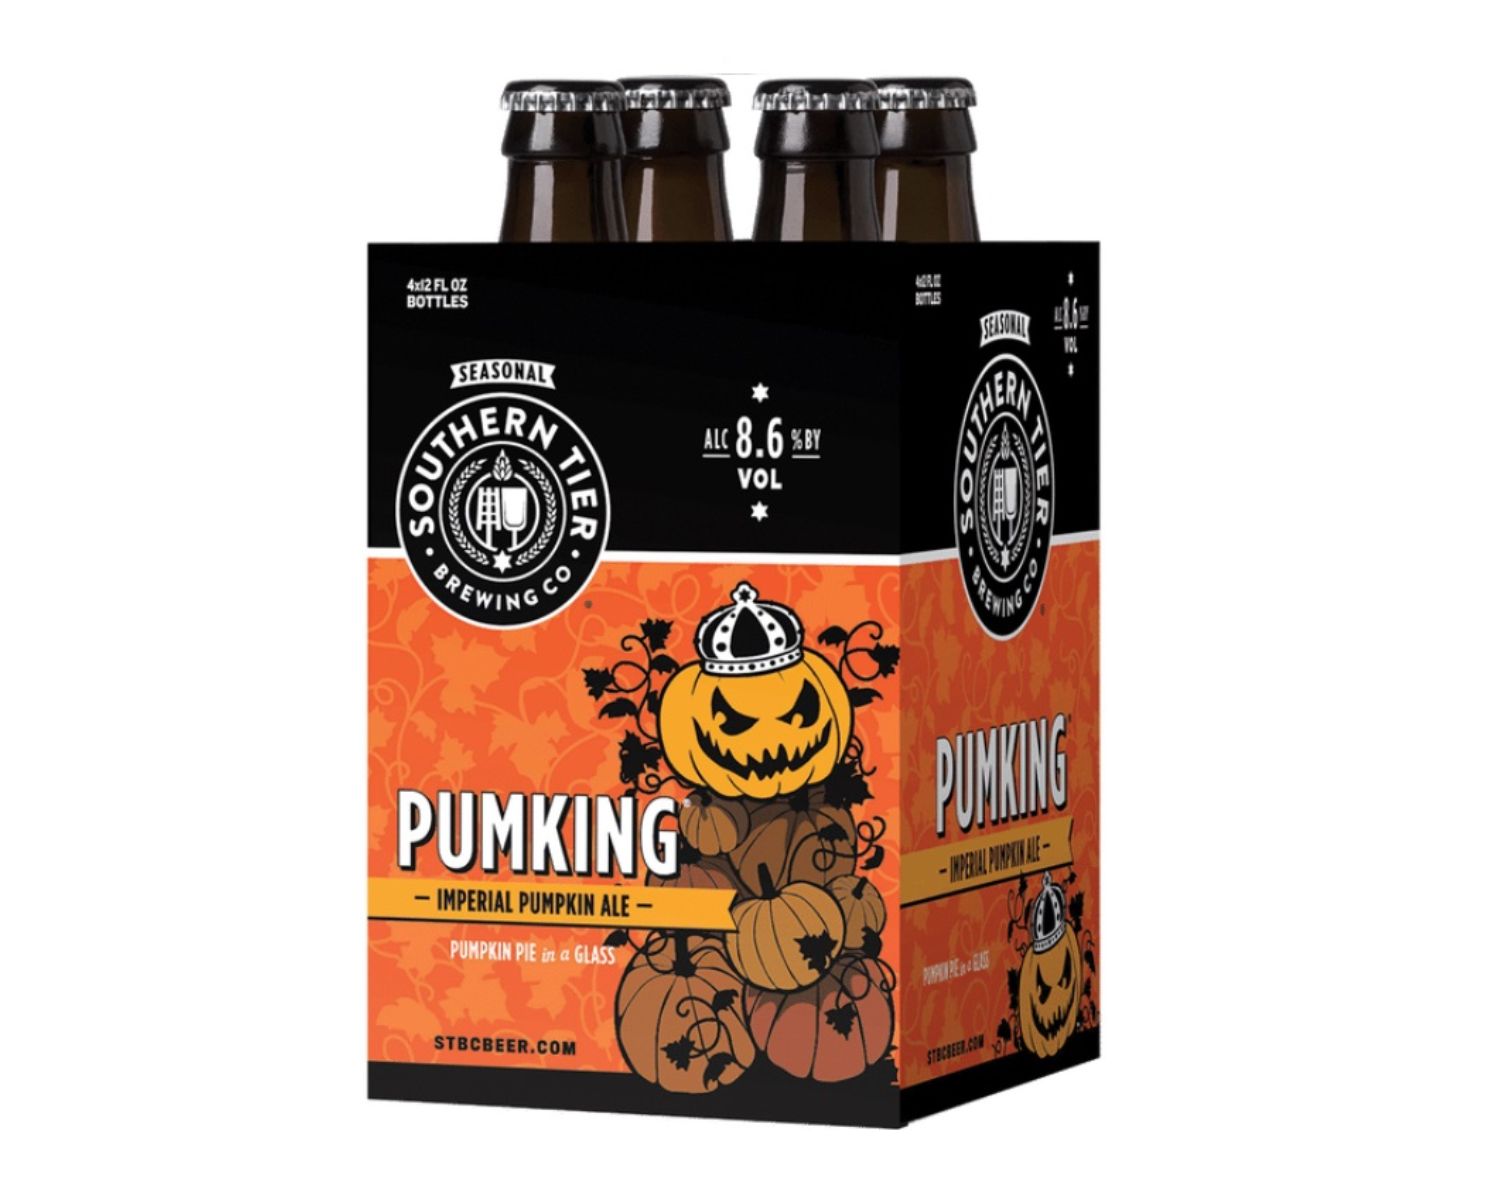 20-southern-tier-pumking-nutrition-facts